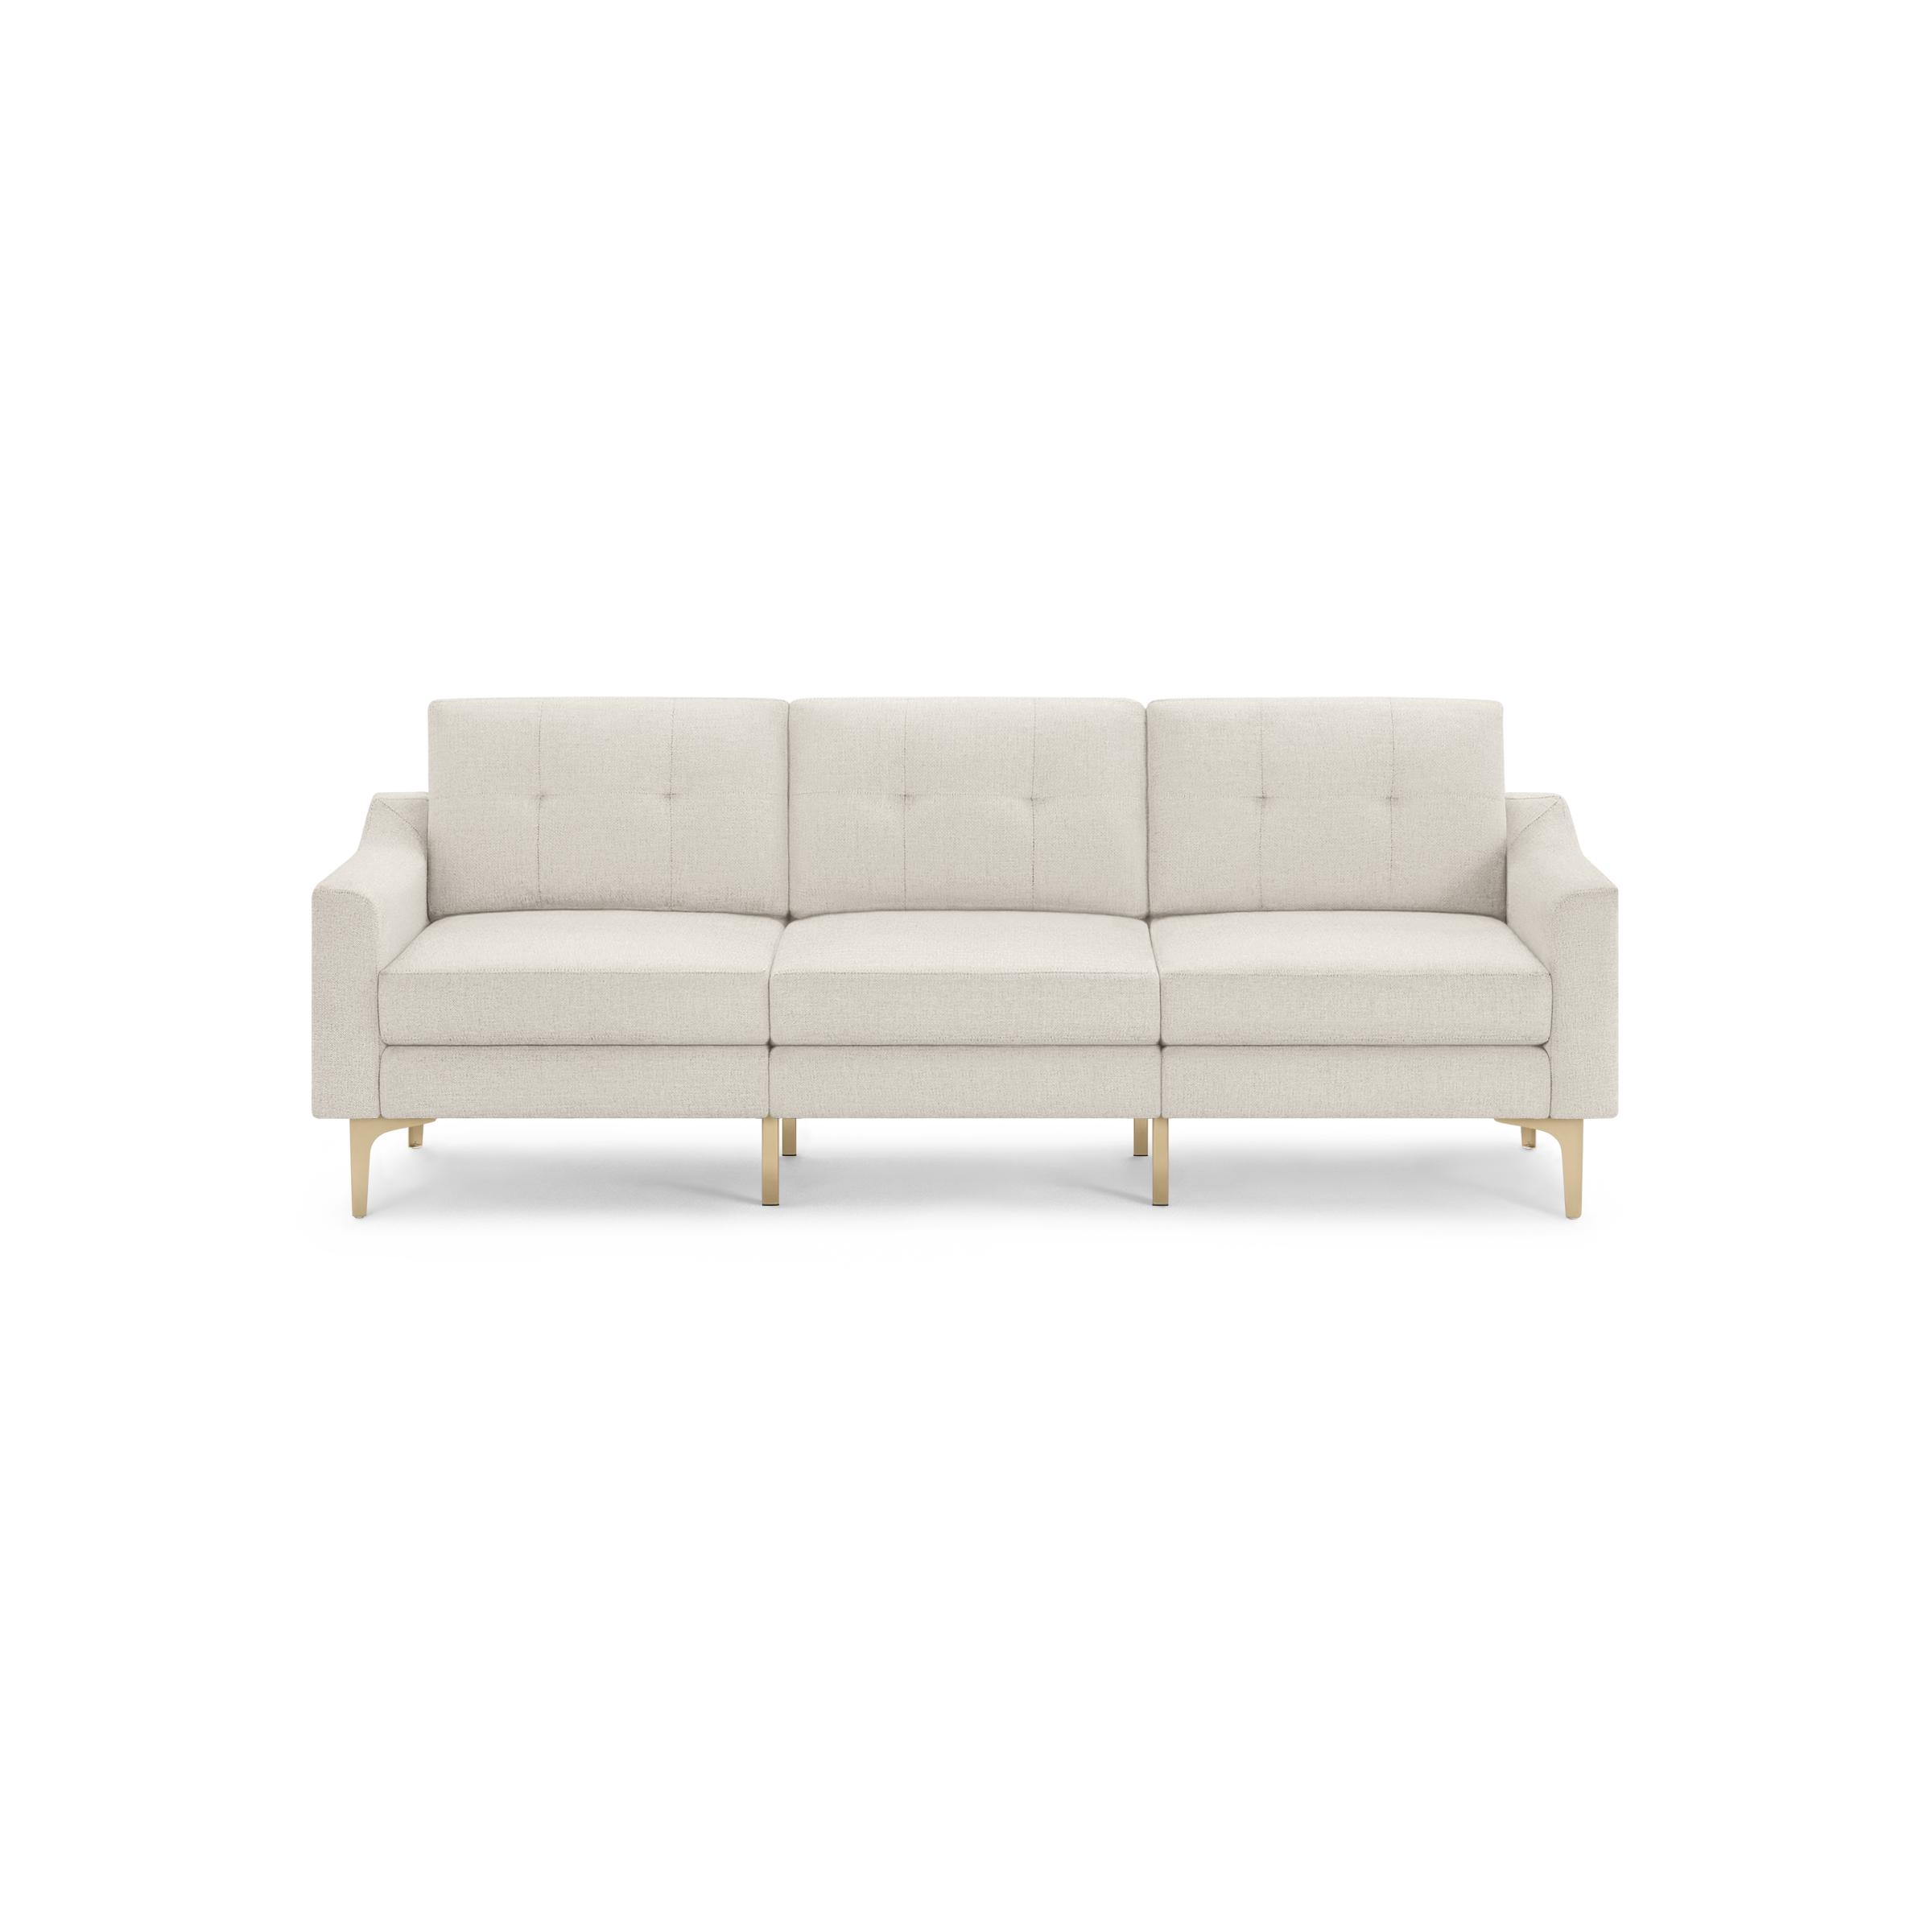 Nomad Sofa in Ivory, Brass Legs - Image 0